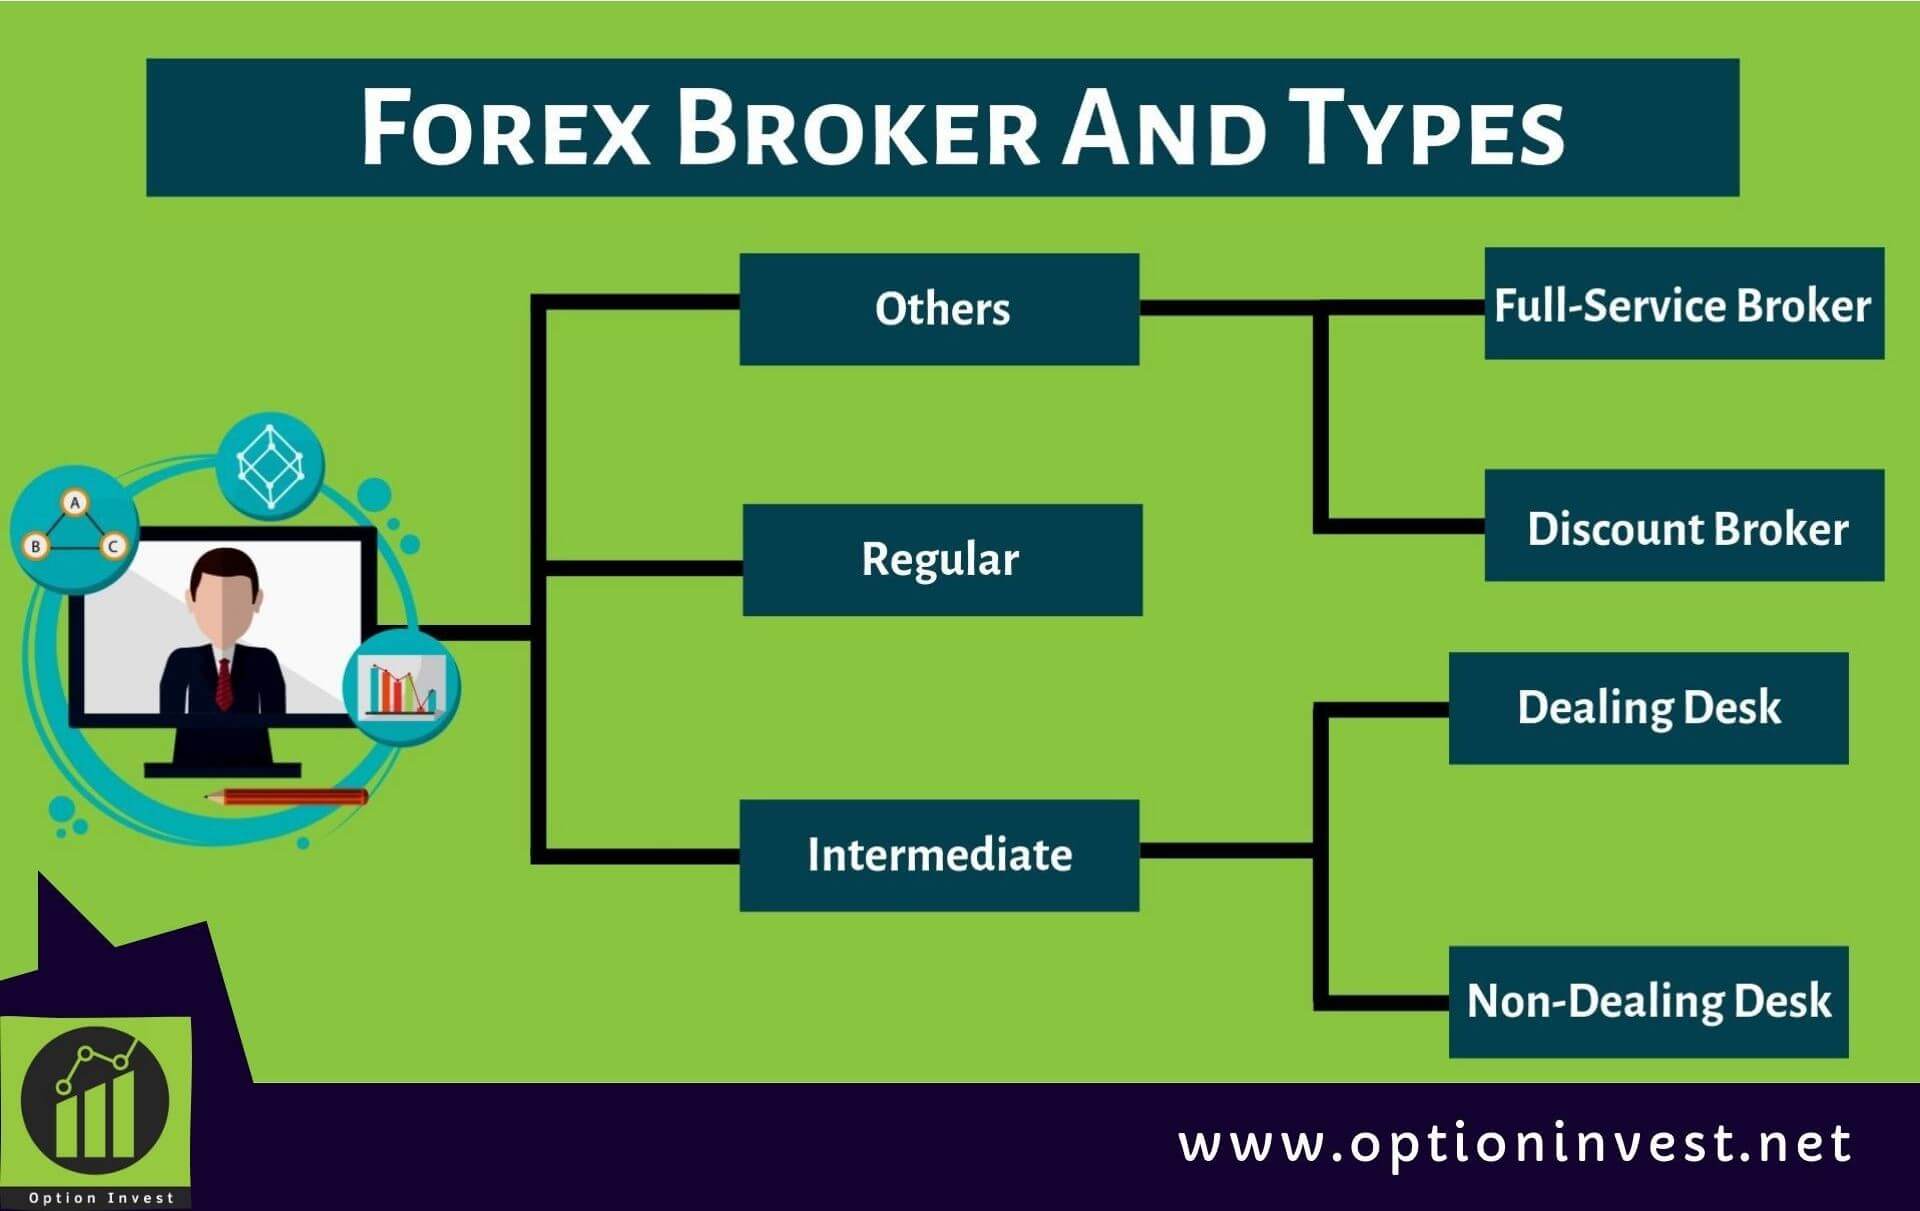 3. How to Ensure Your Forex Account is Secure and Protected